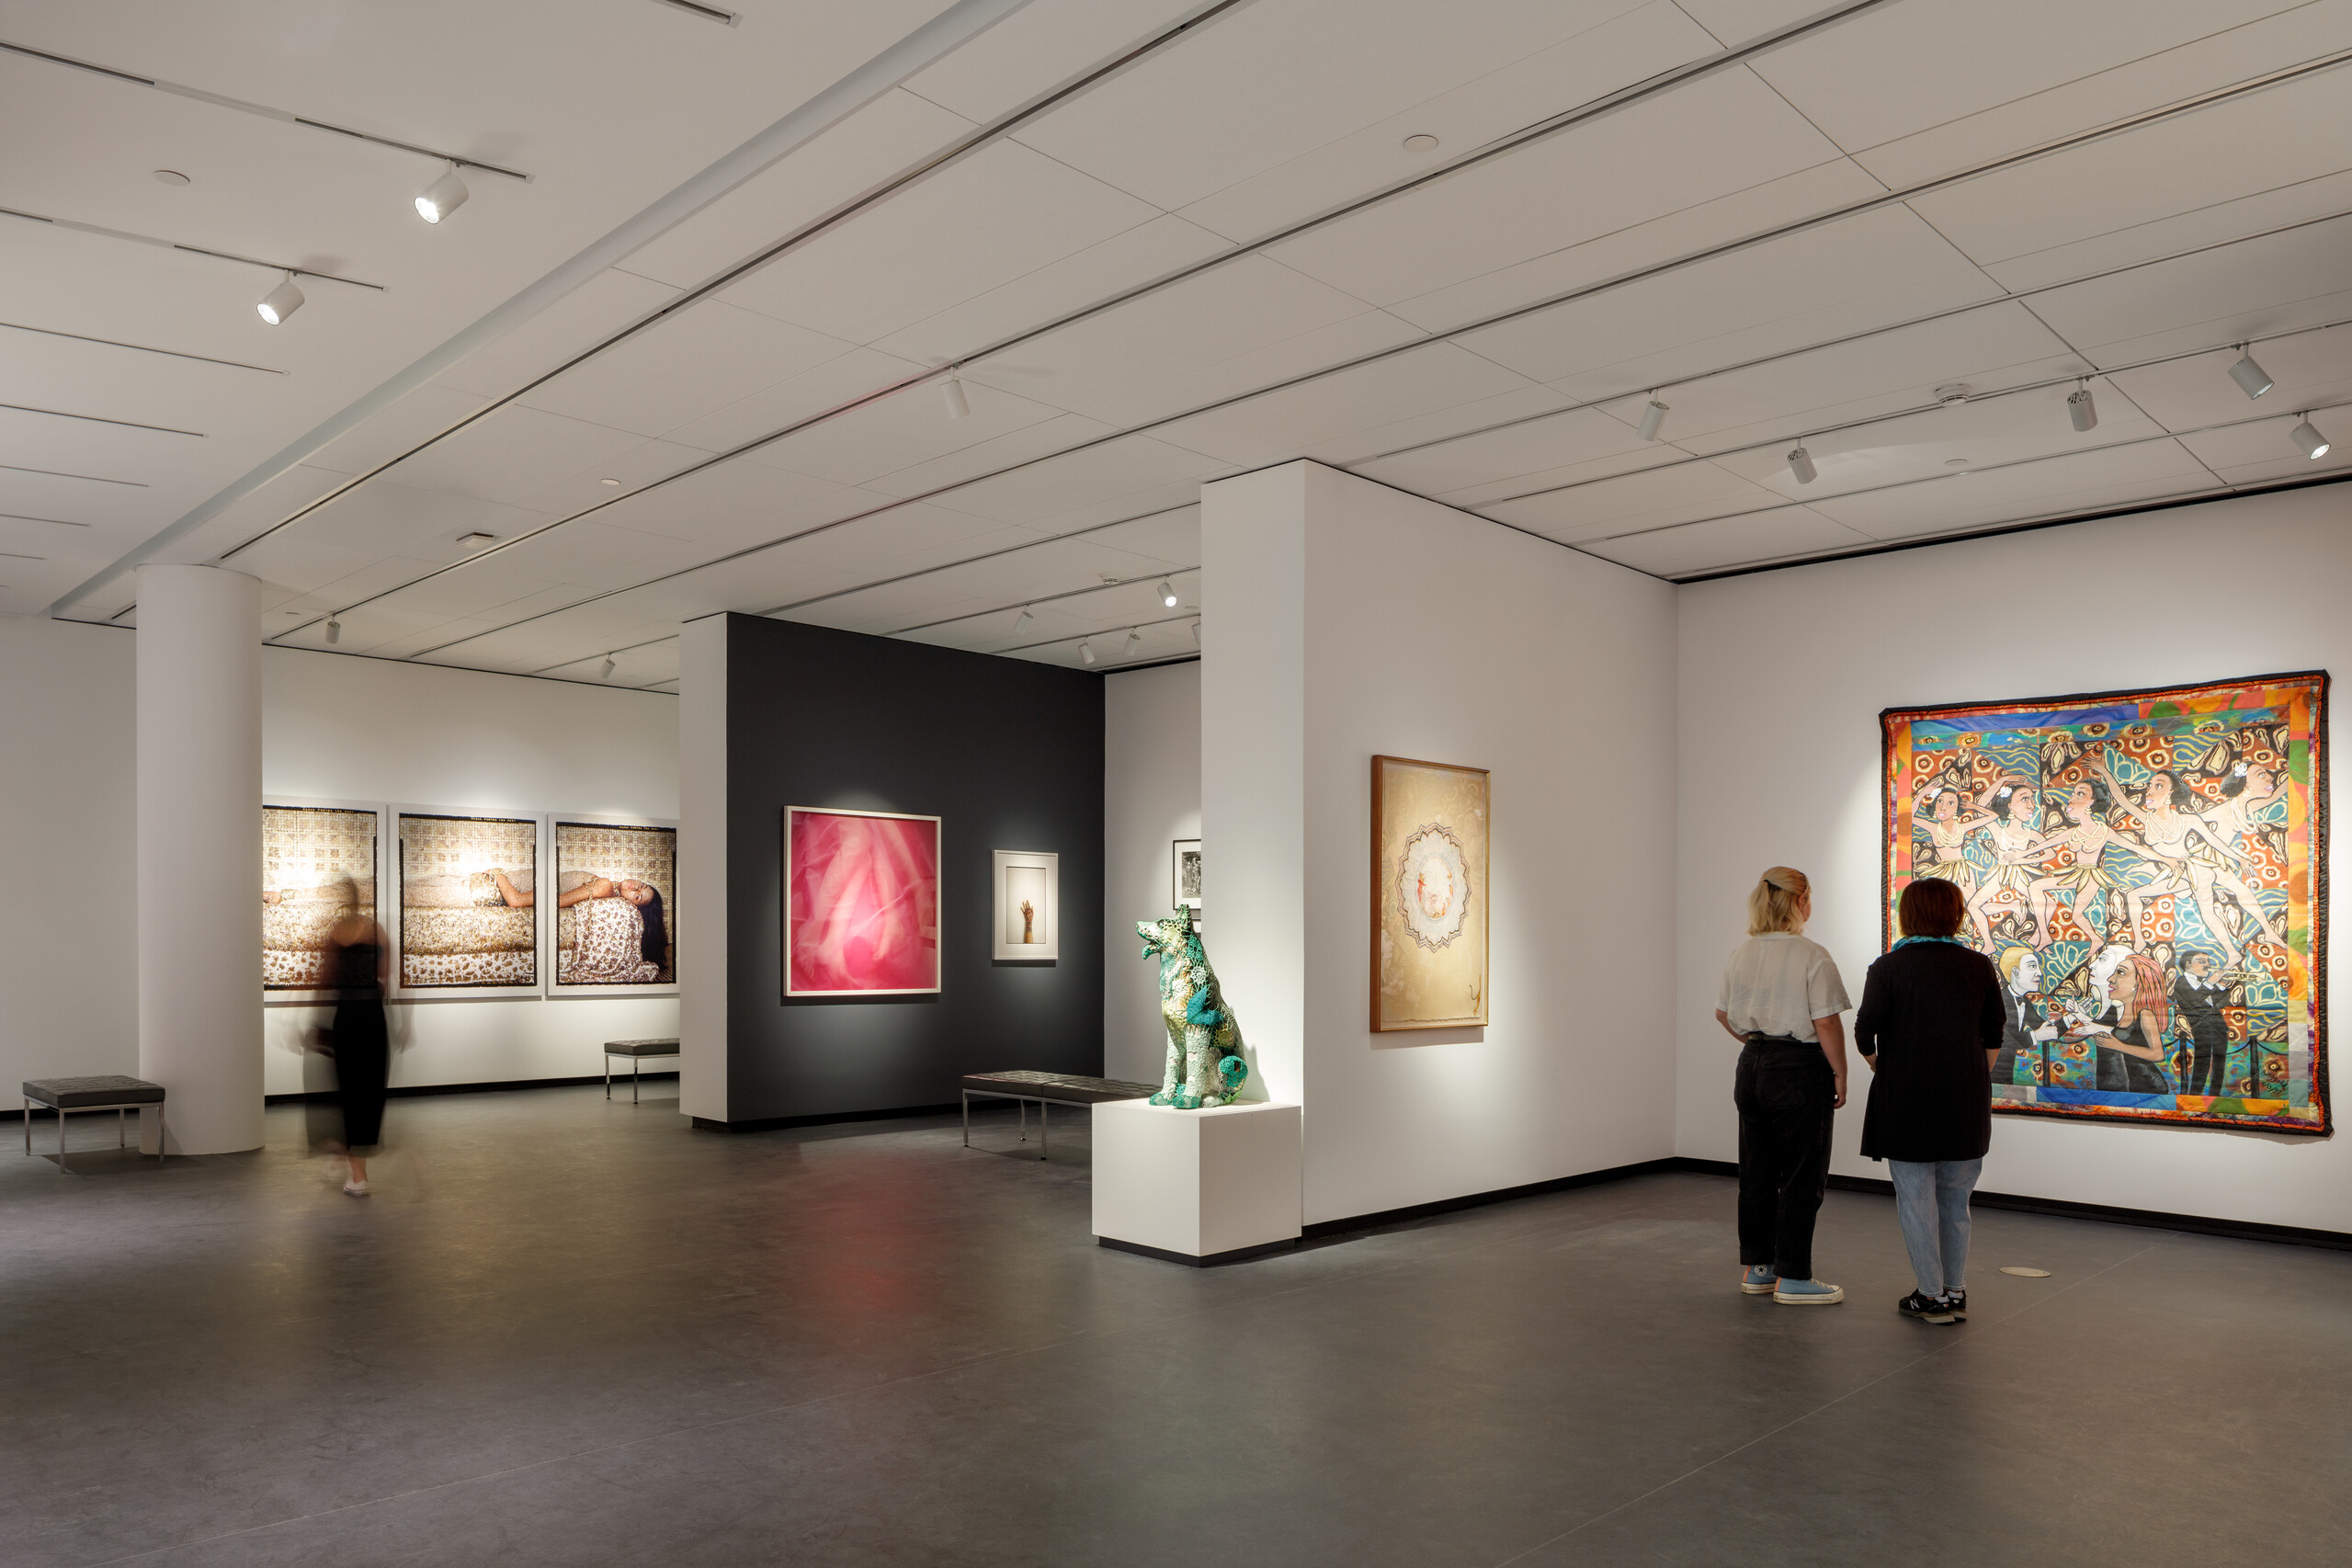 A modern museum gallery is photographed at a wide angle. It features several inset bays in which art of various sizes and mediums is hung. Visitors walk through the galleries and observe the works.